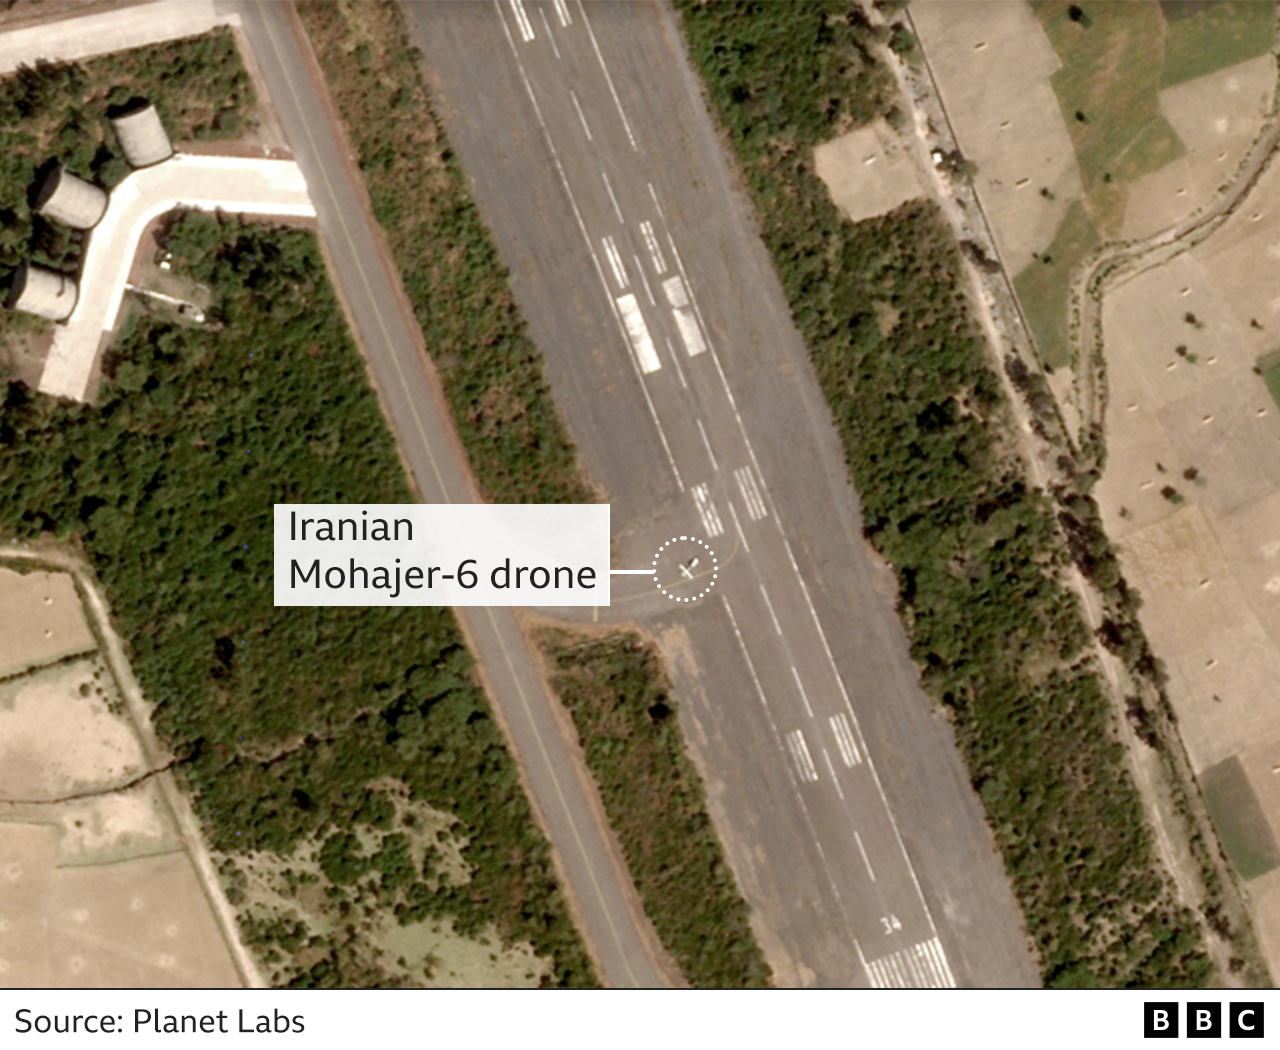 Satellite image showing an Iranian drone at Harar Meda airport